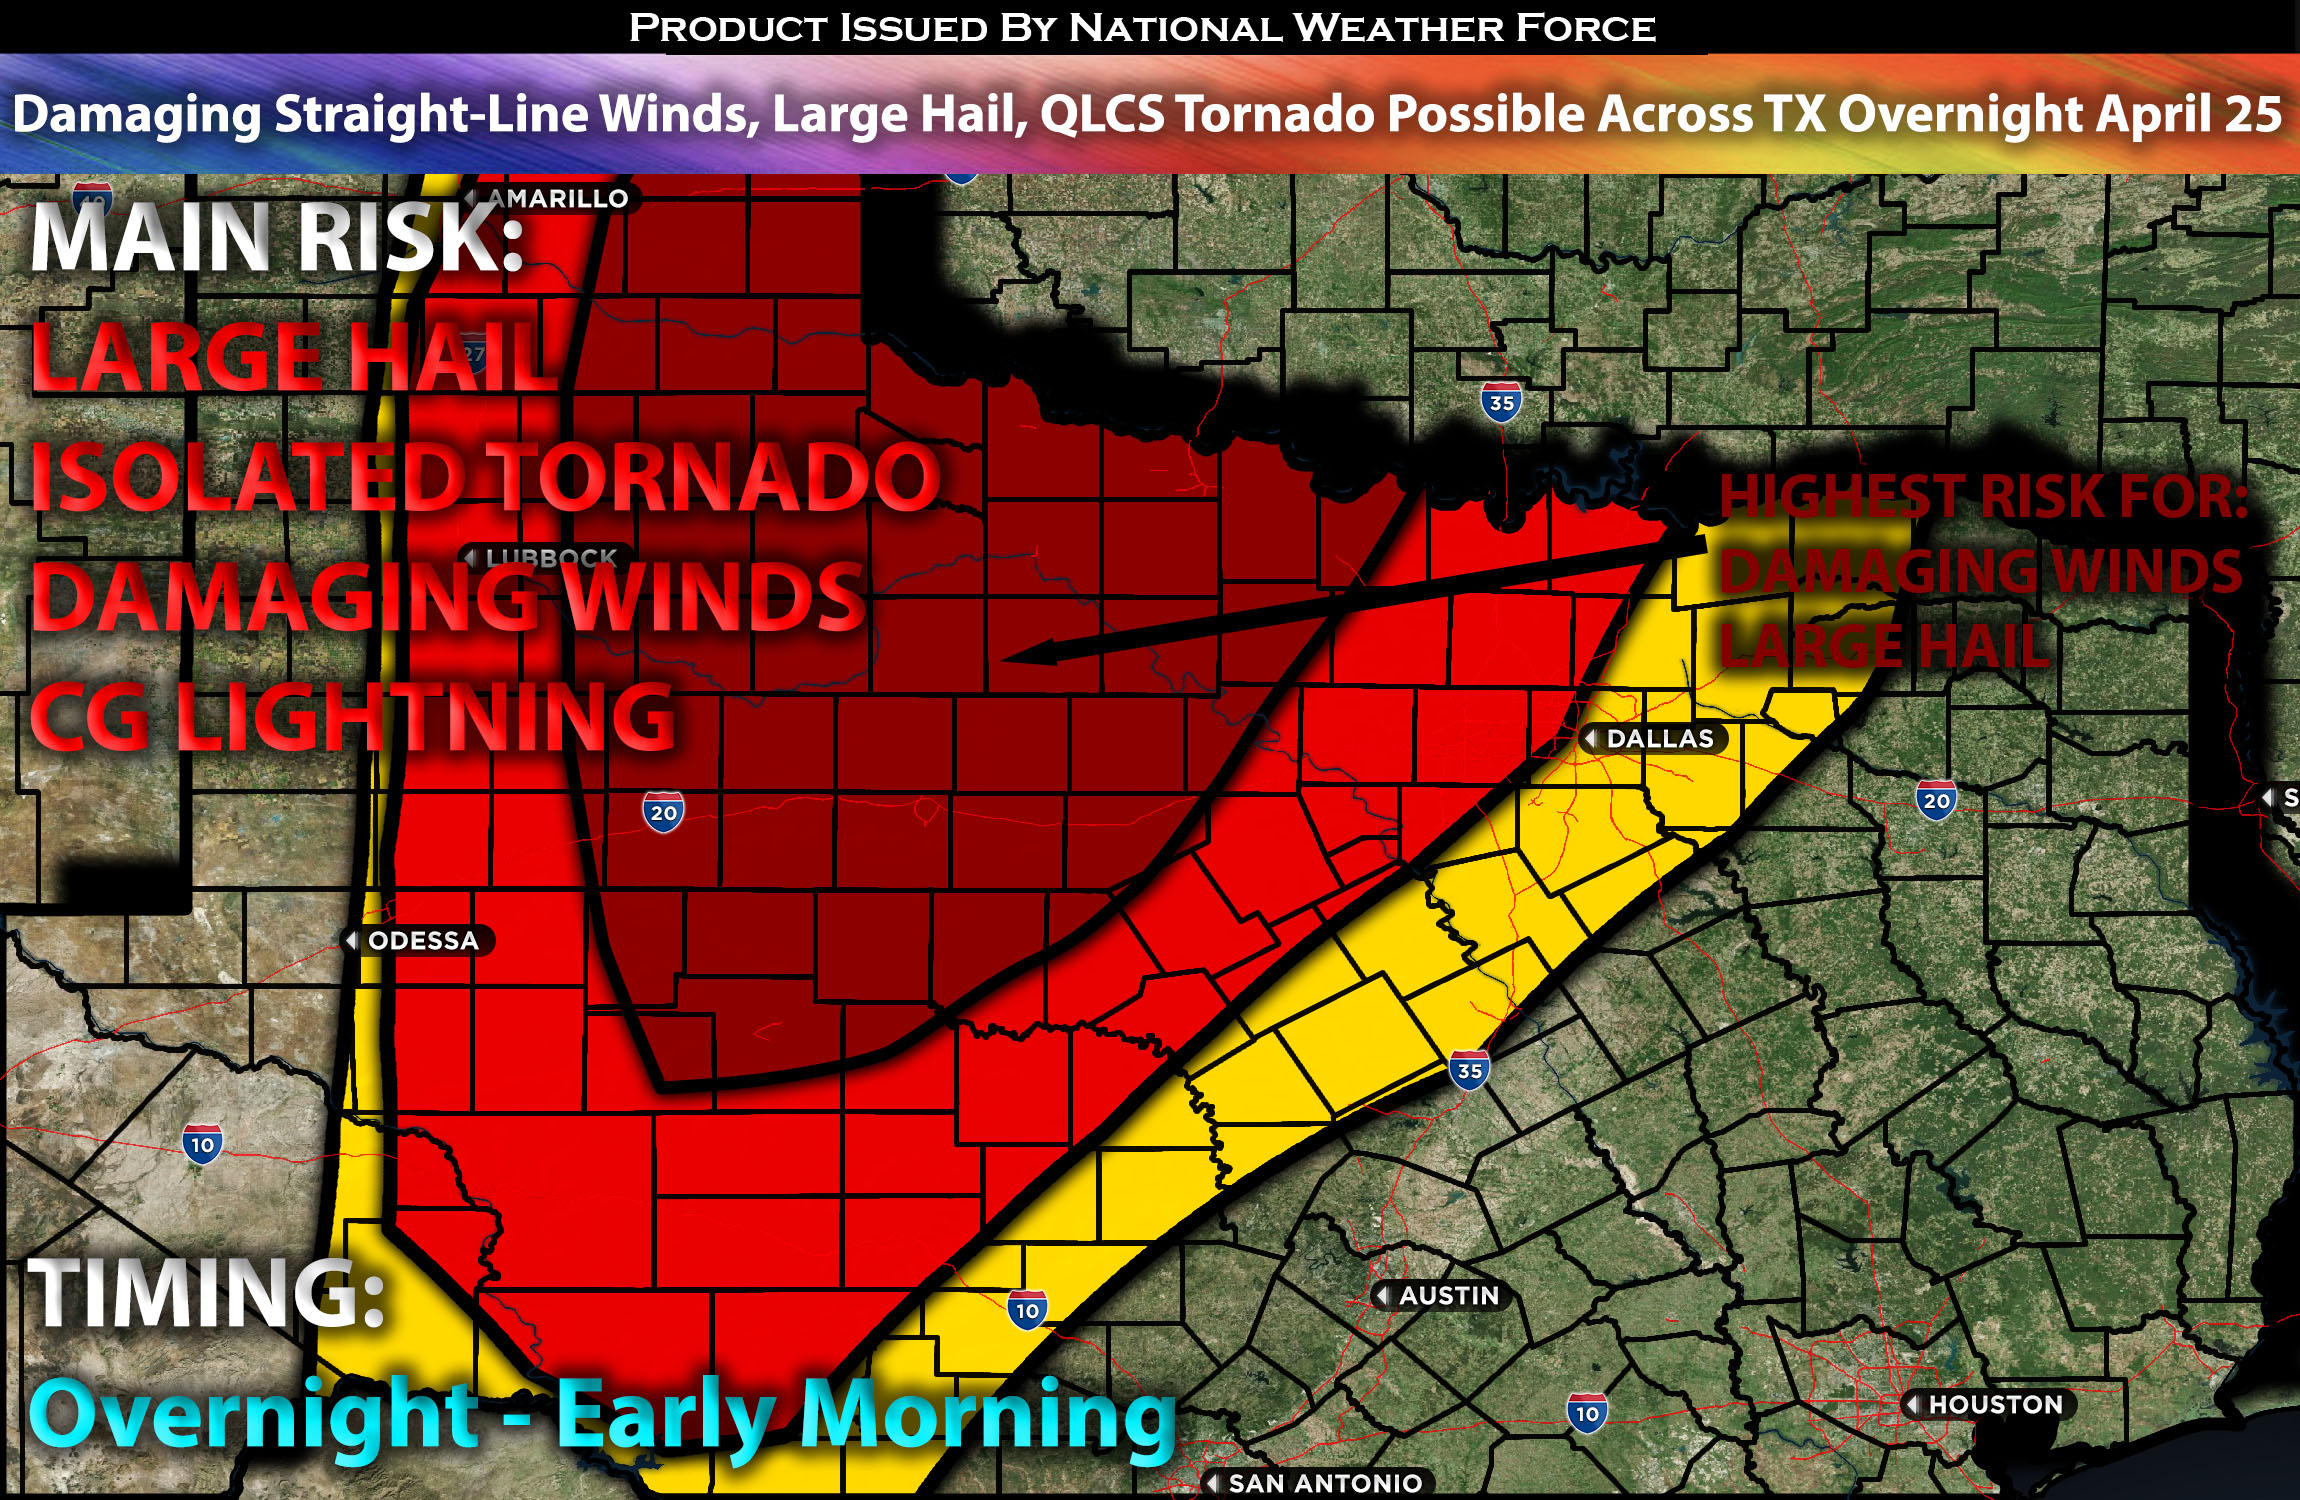 Damaging Straight-Line Winds, Large Hail, QLCS Tornado Possible Across TX Overnight on April 25-26th